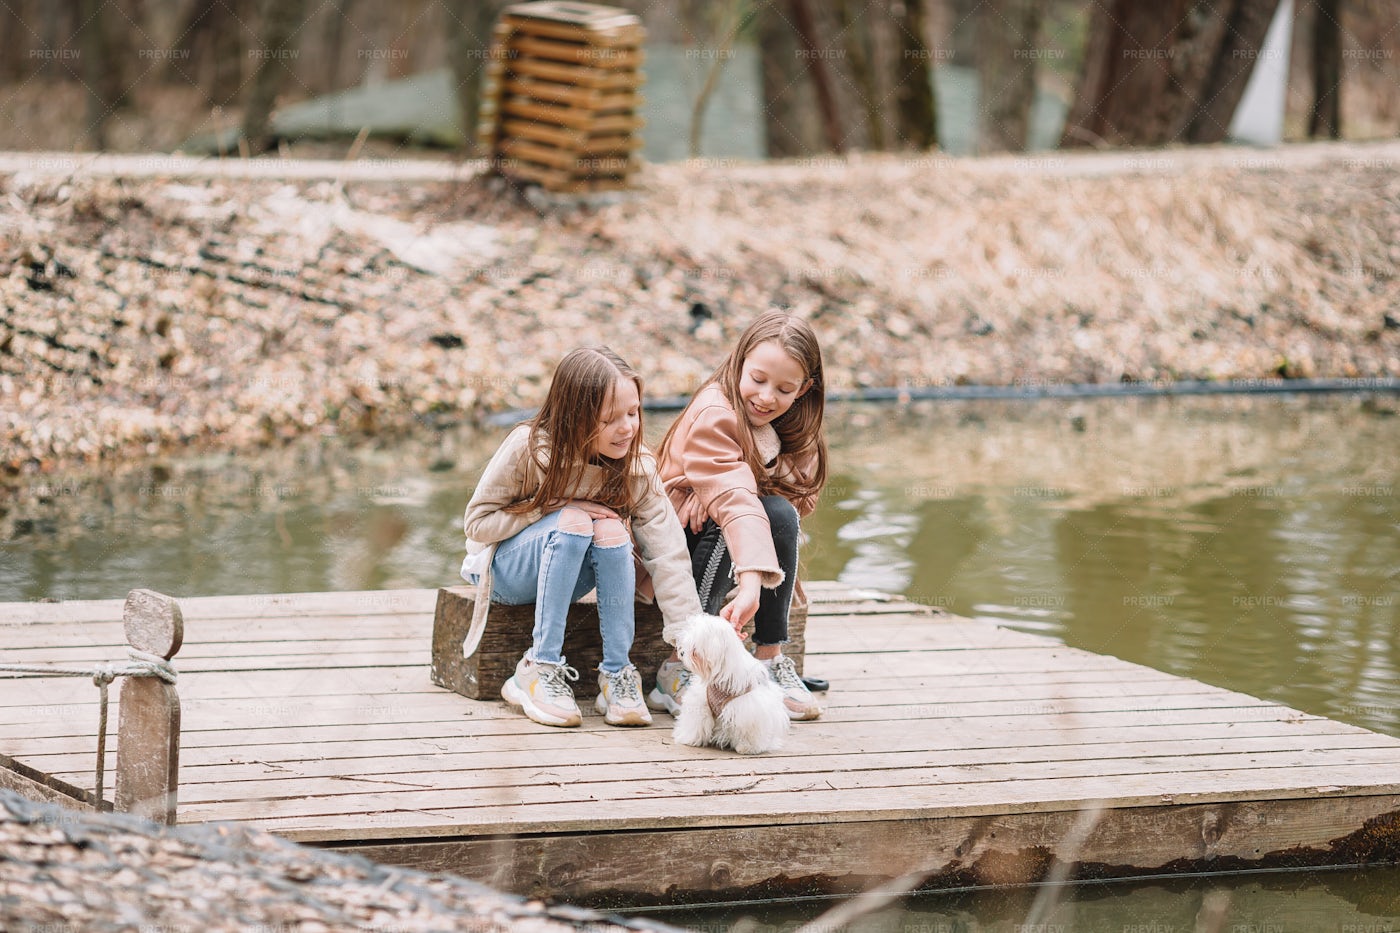 Little Girls With A Puppy.: Stock Photos